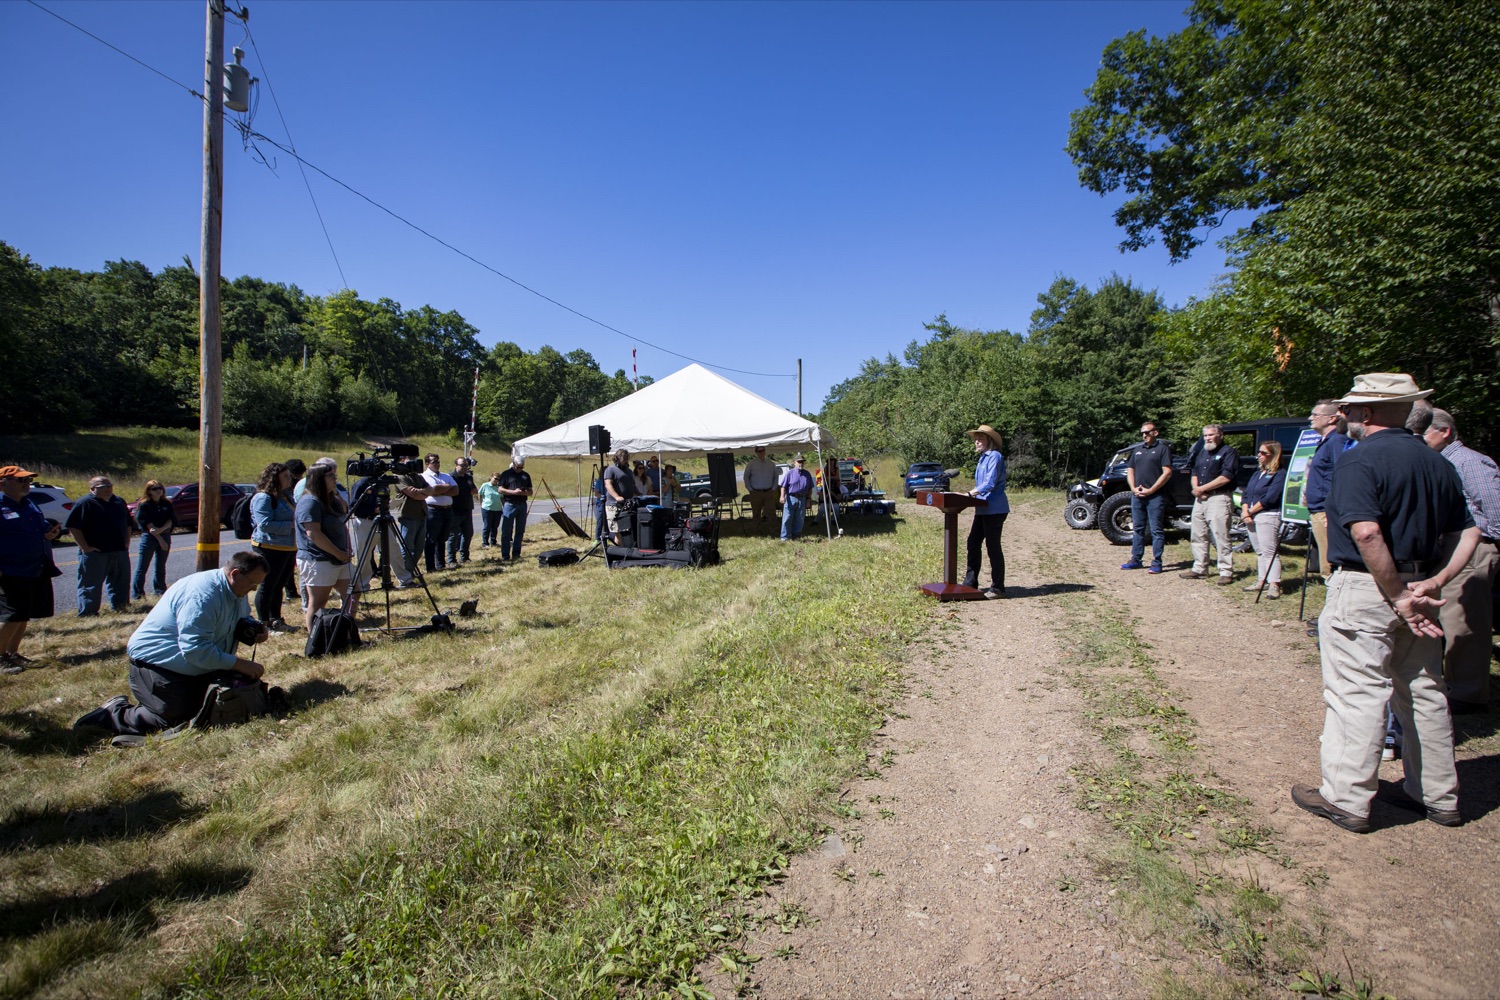 DCNR Secretary Cindy Adams Dunn announces a new motorized recreation area in Weiser State Forest District that will expand opportunities for ATVs, dirt bikes, off-highway vehicles, and other forms of recreation  in McAdoo, PA on August 12, 2022.<br><a href="https://filesource.amperwave.net/commonwealthofpa/photo/22090_dcnr_RecreationArea_09.jpg" target="_blank">⇣ Download Photo</a>